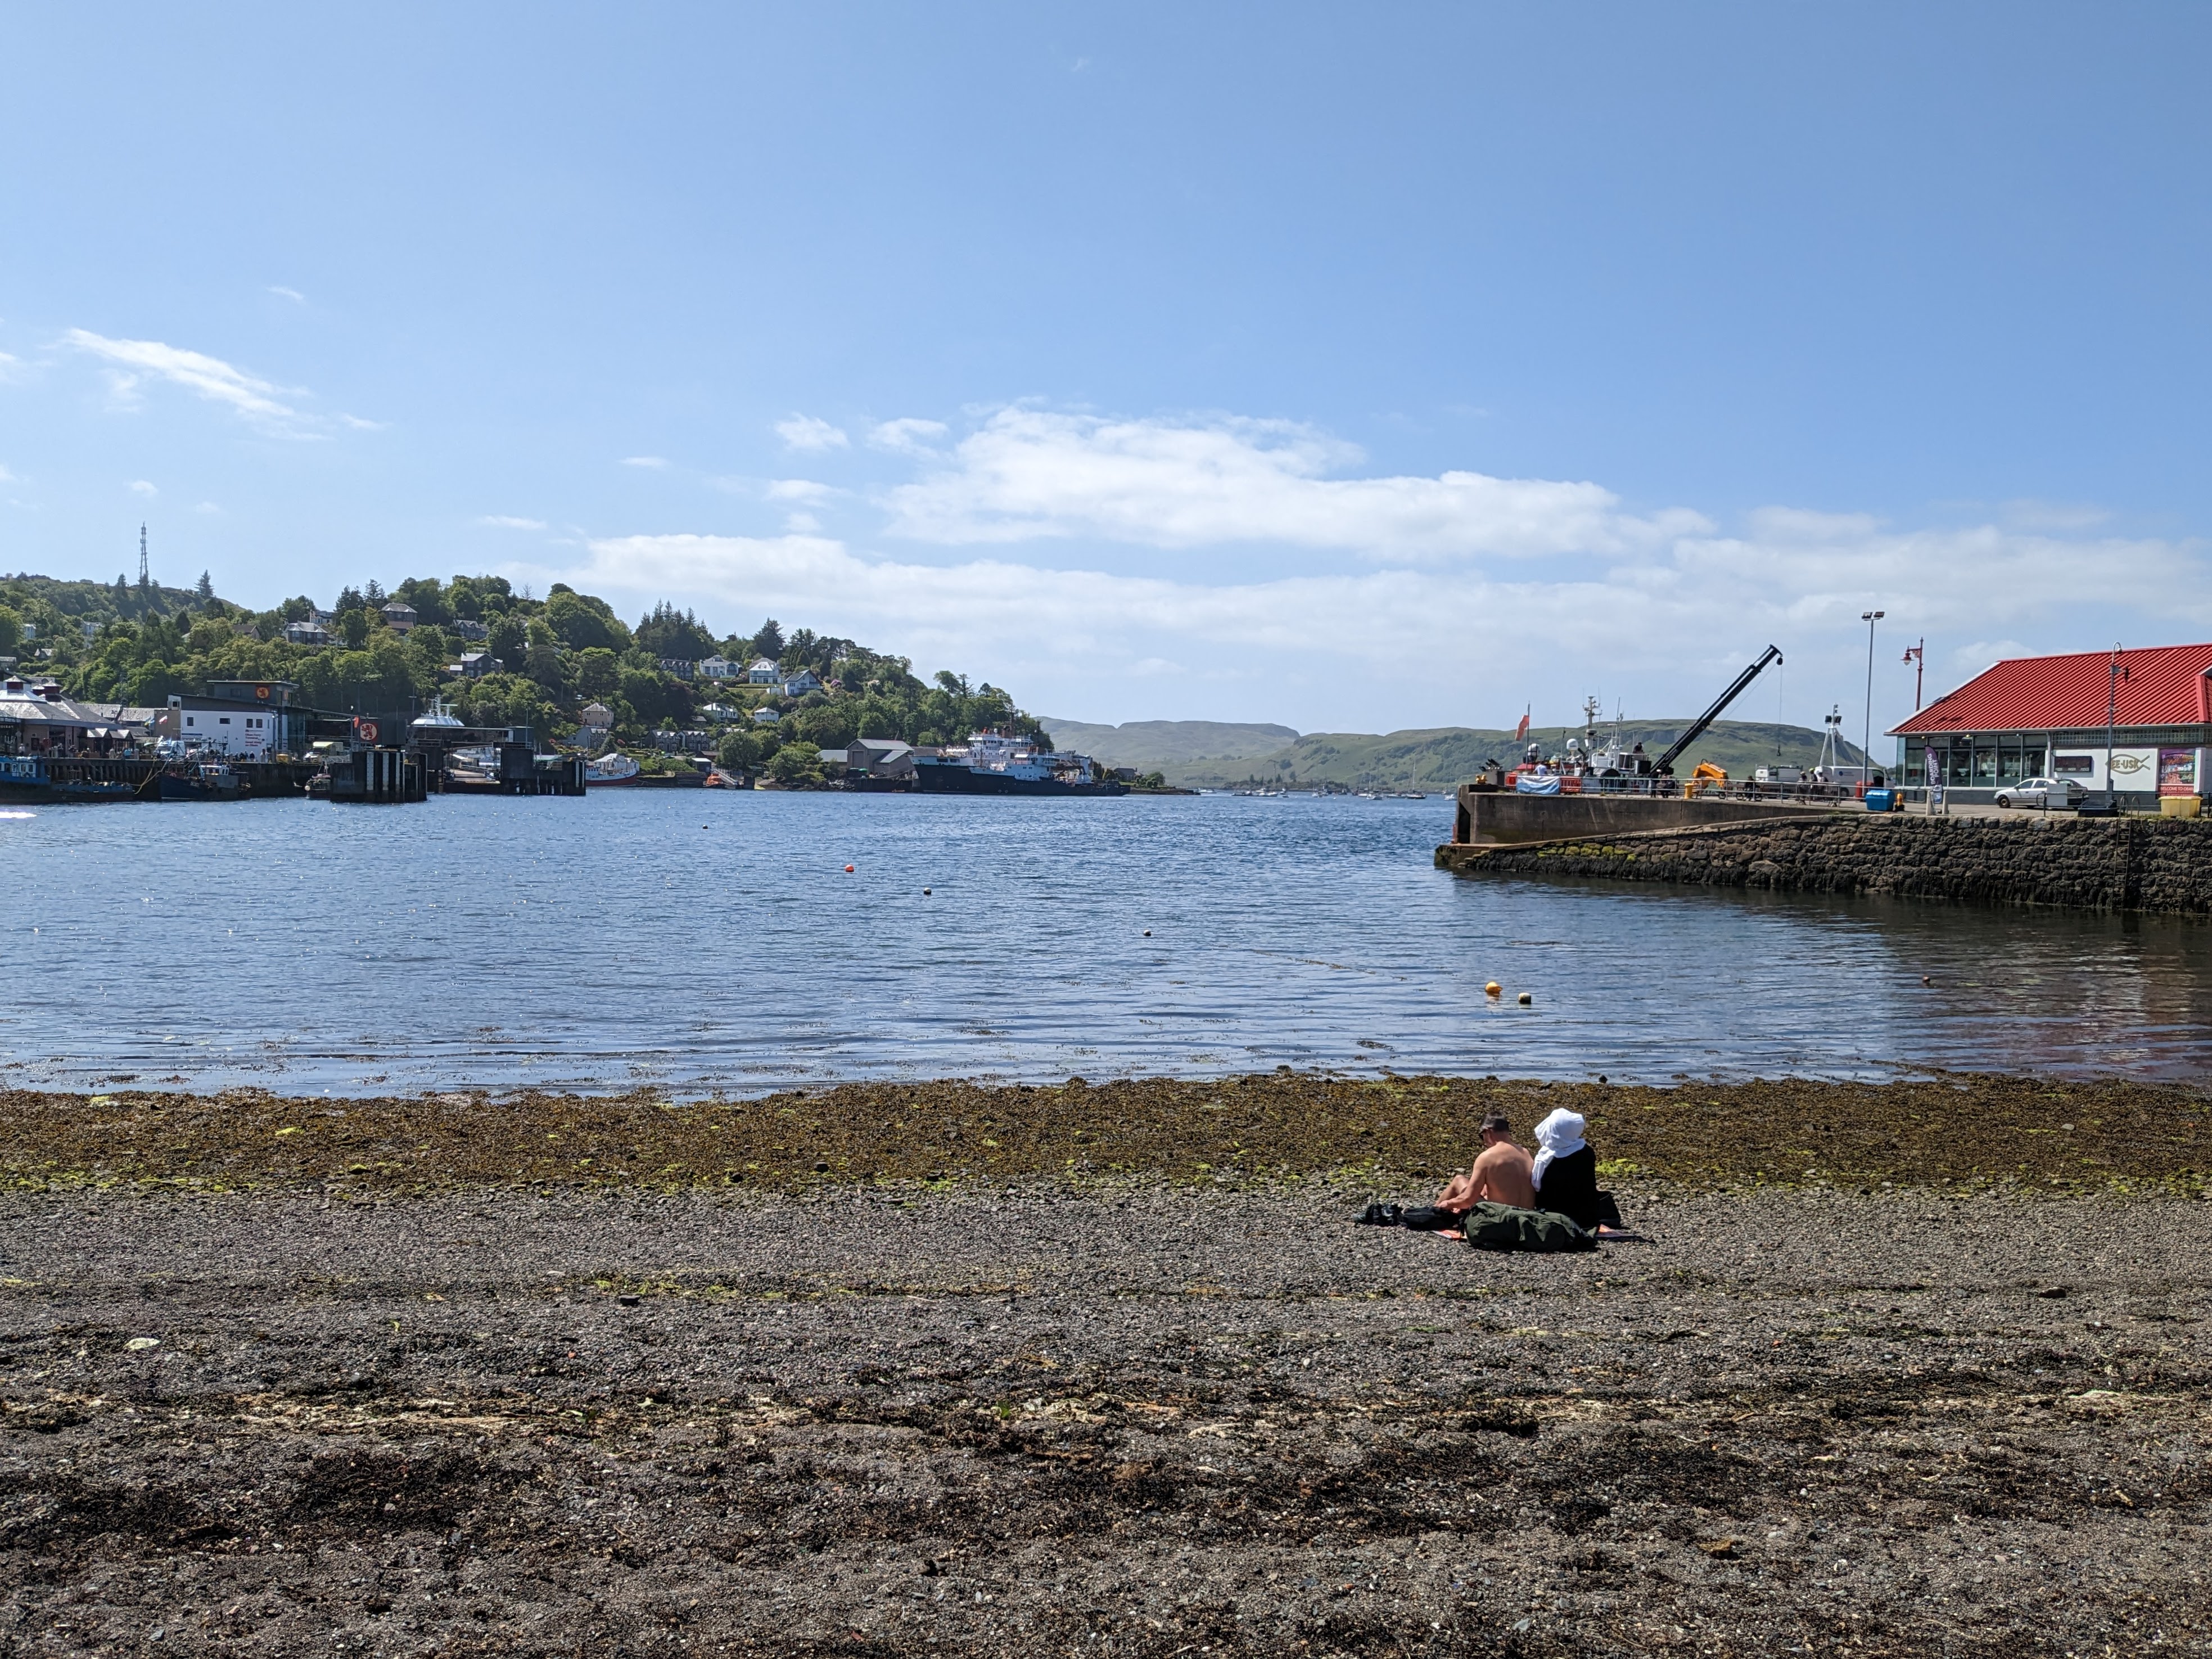 A view of Oban Bay from a rocky beach in Oban, Scotland.